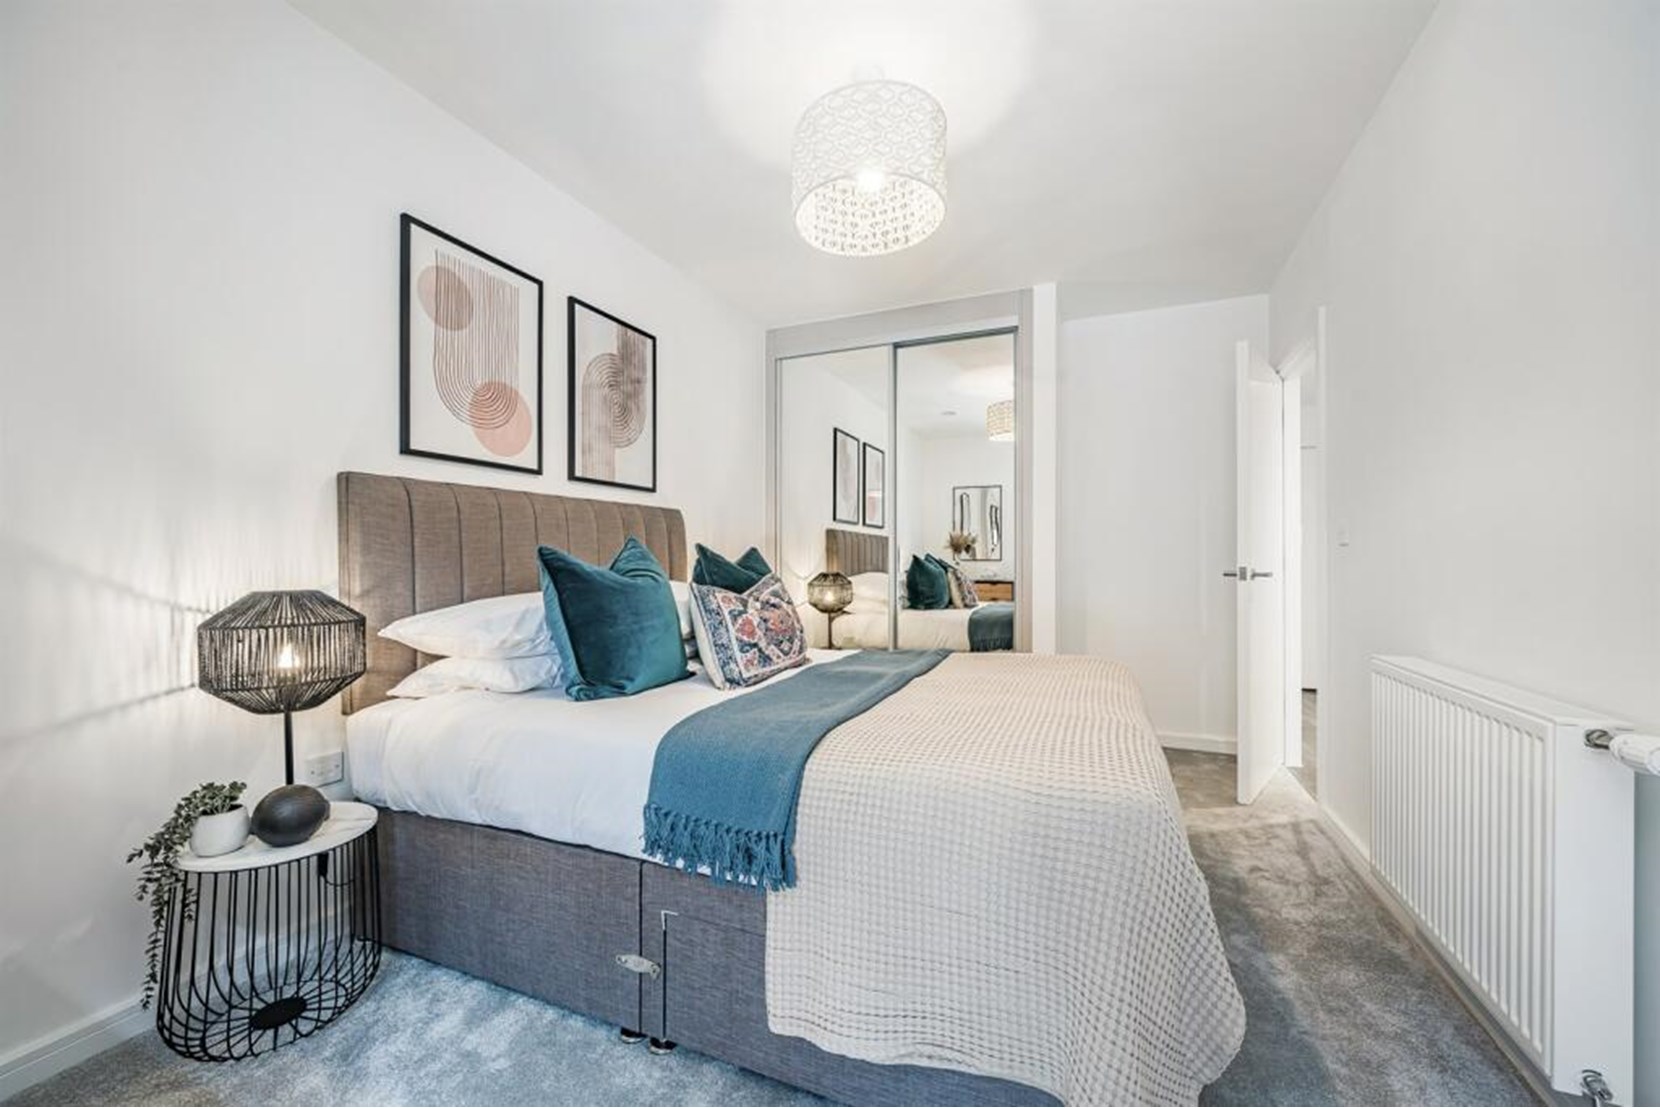 Apartments to Rent by Simple Life London in Elements, Enfield, EN3, The Argon bedroom